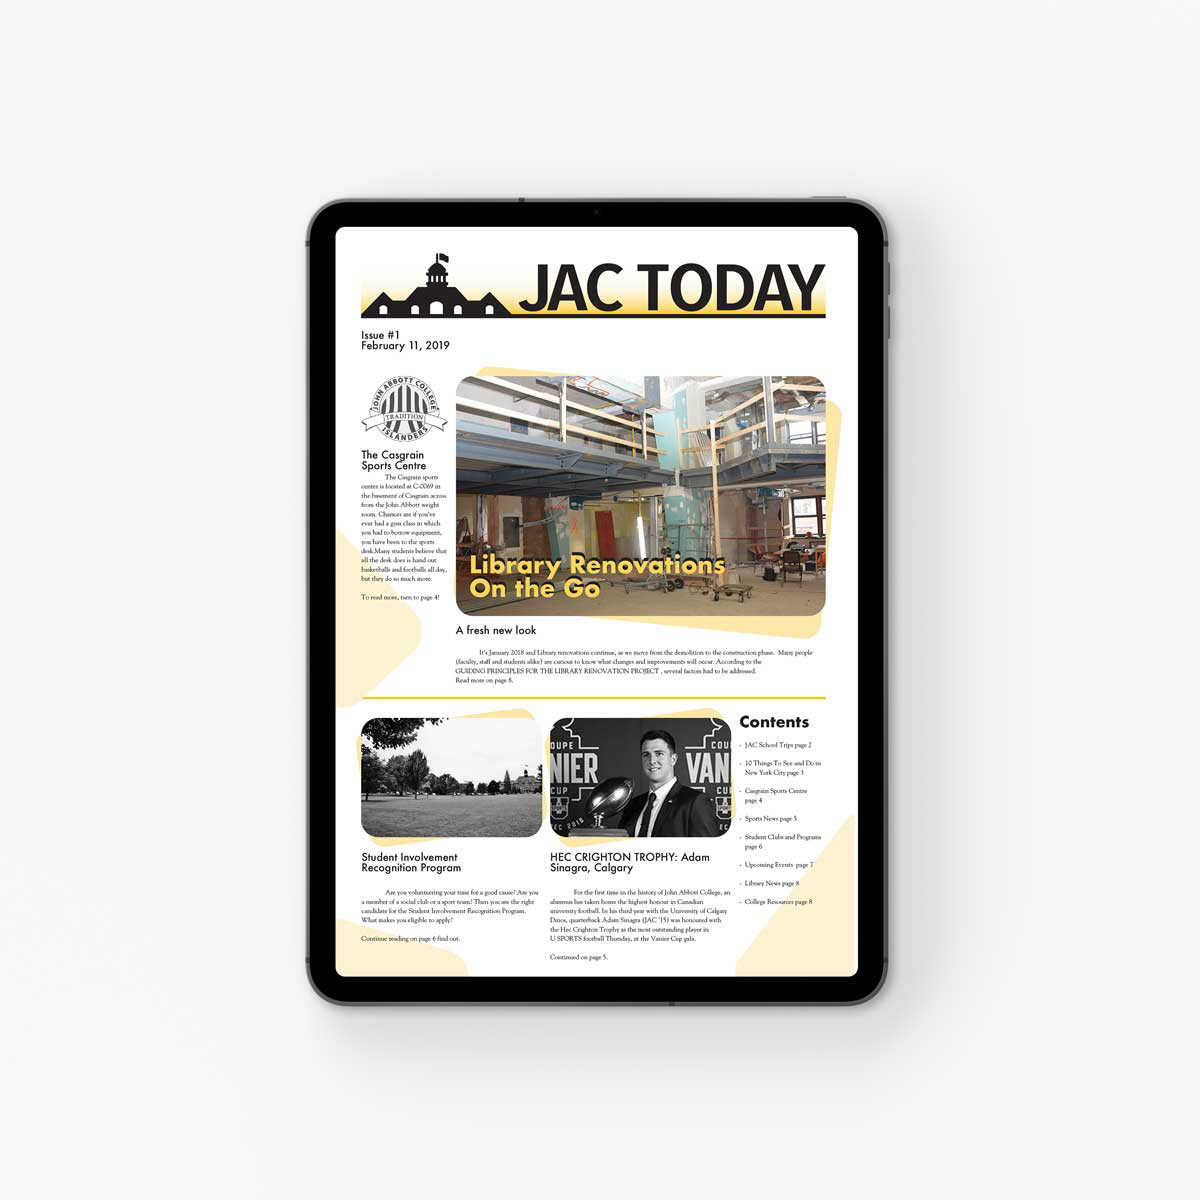 This is an ebook for the JAC Newsletter